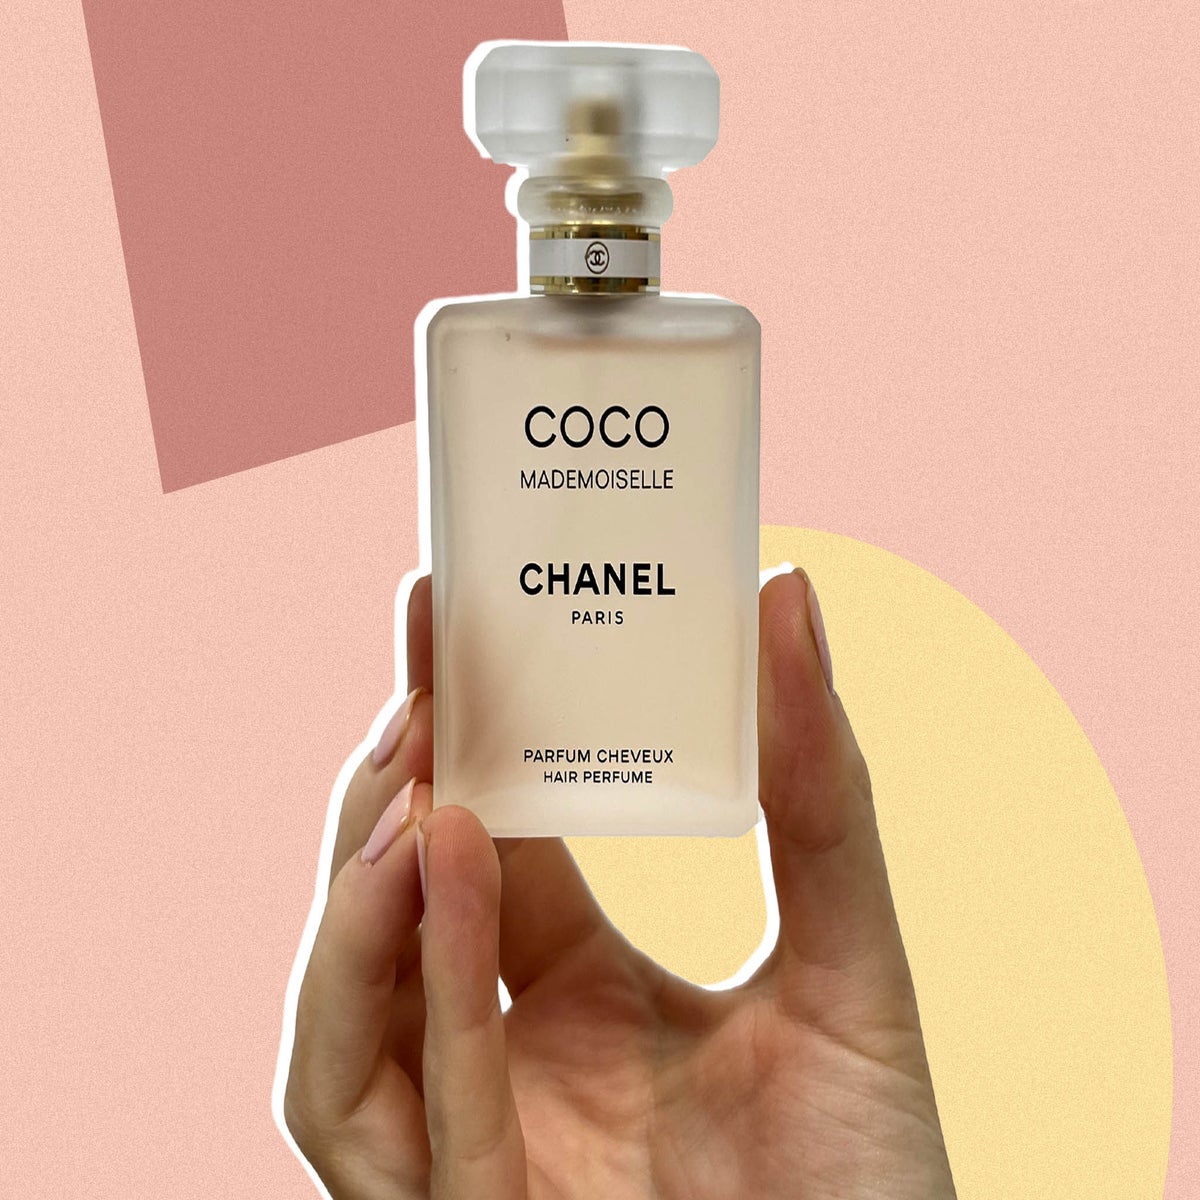 Chanel's new coco mademoiselle creation is here, and this is what we of the perfume | The Independent